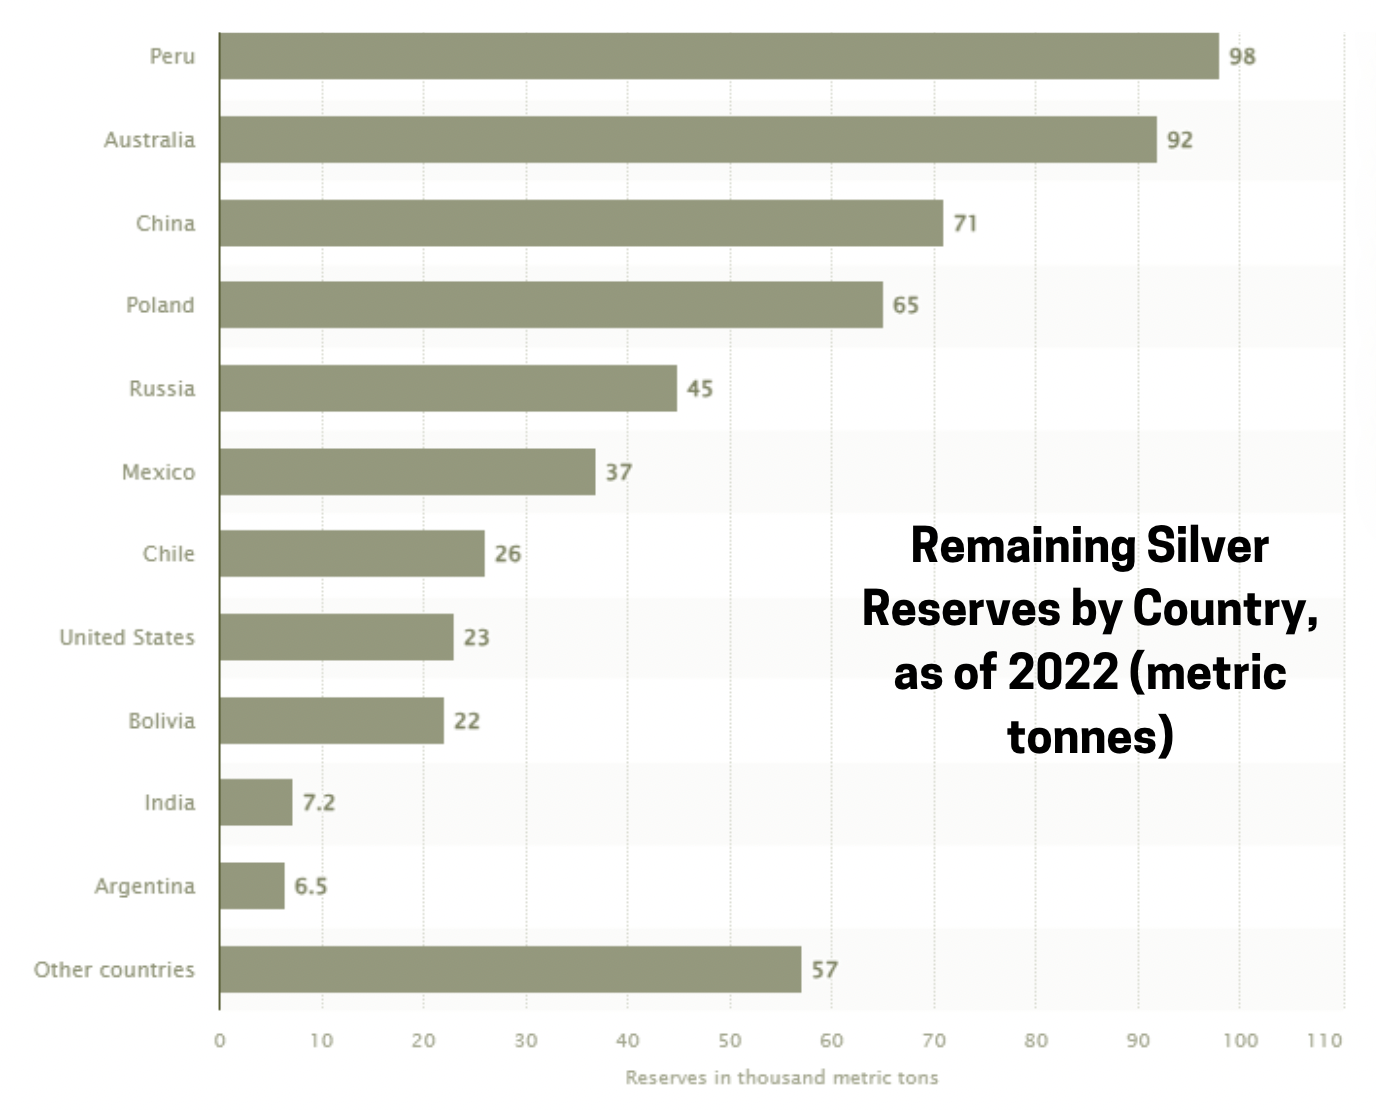 Global Silver Reserves